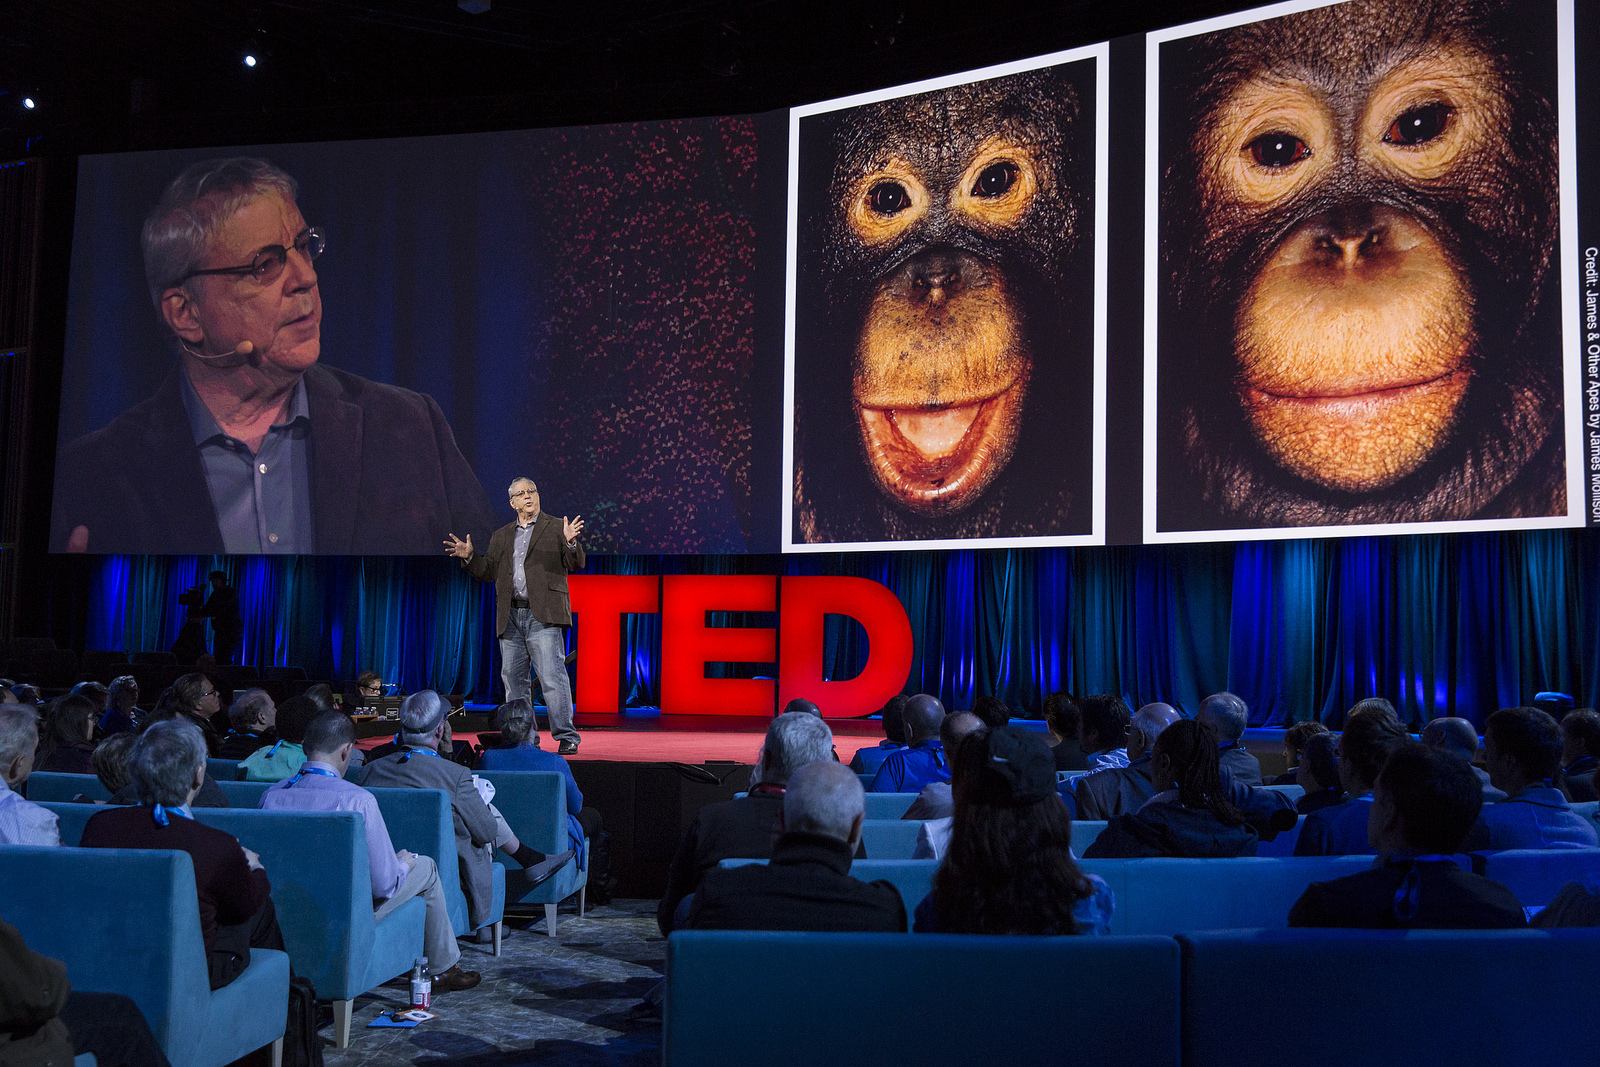 Steven Wise shares the legal argument why animals like chimps should receive rights at TED2015. A judge granted him a major victory this week. Photo: Bret Hartman/TED